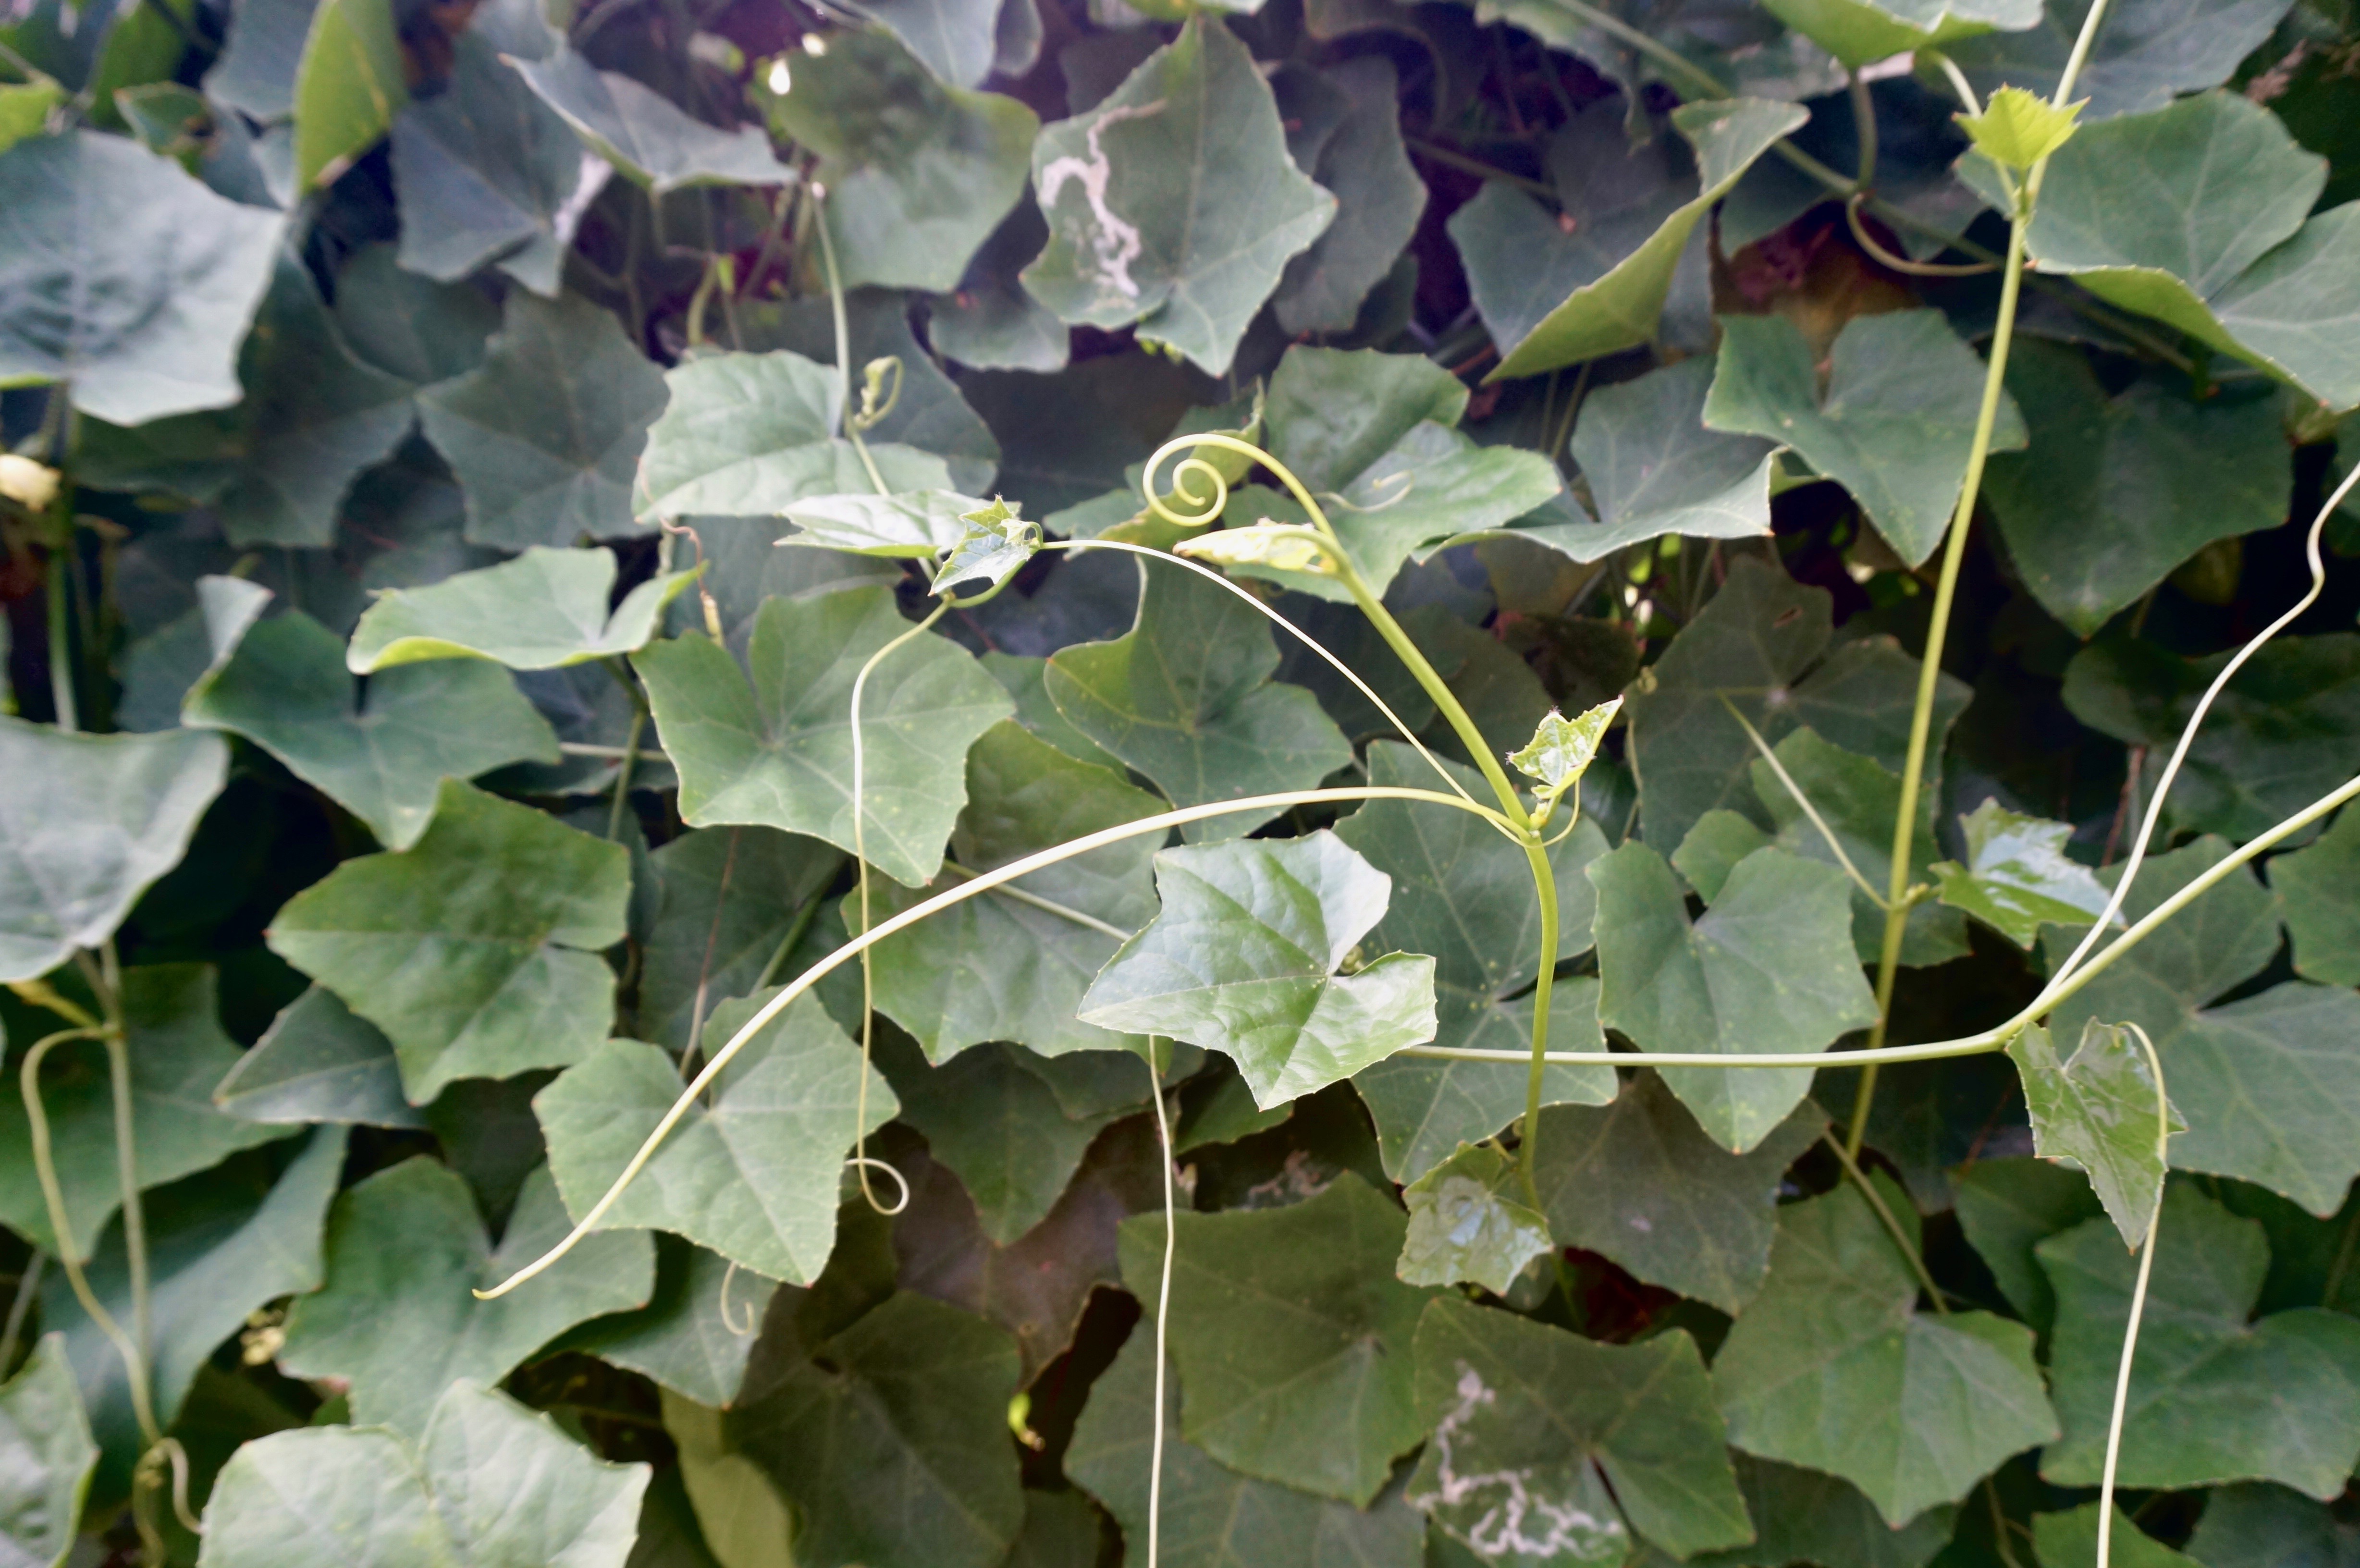 Tindora/ivy gourd shoot with tendrils.